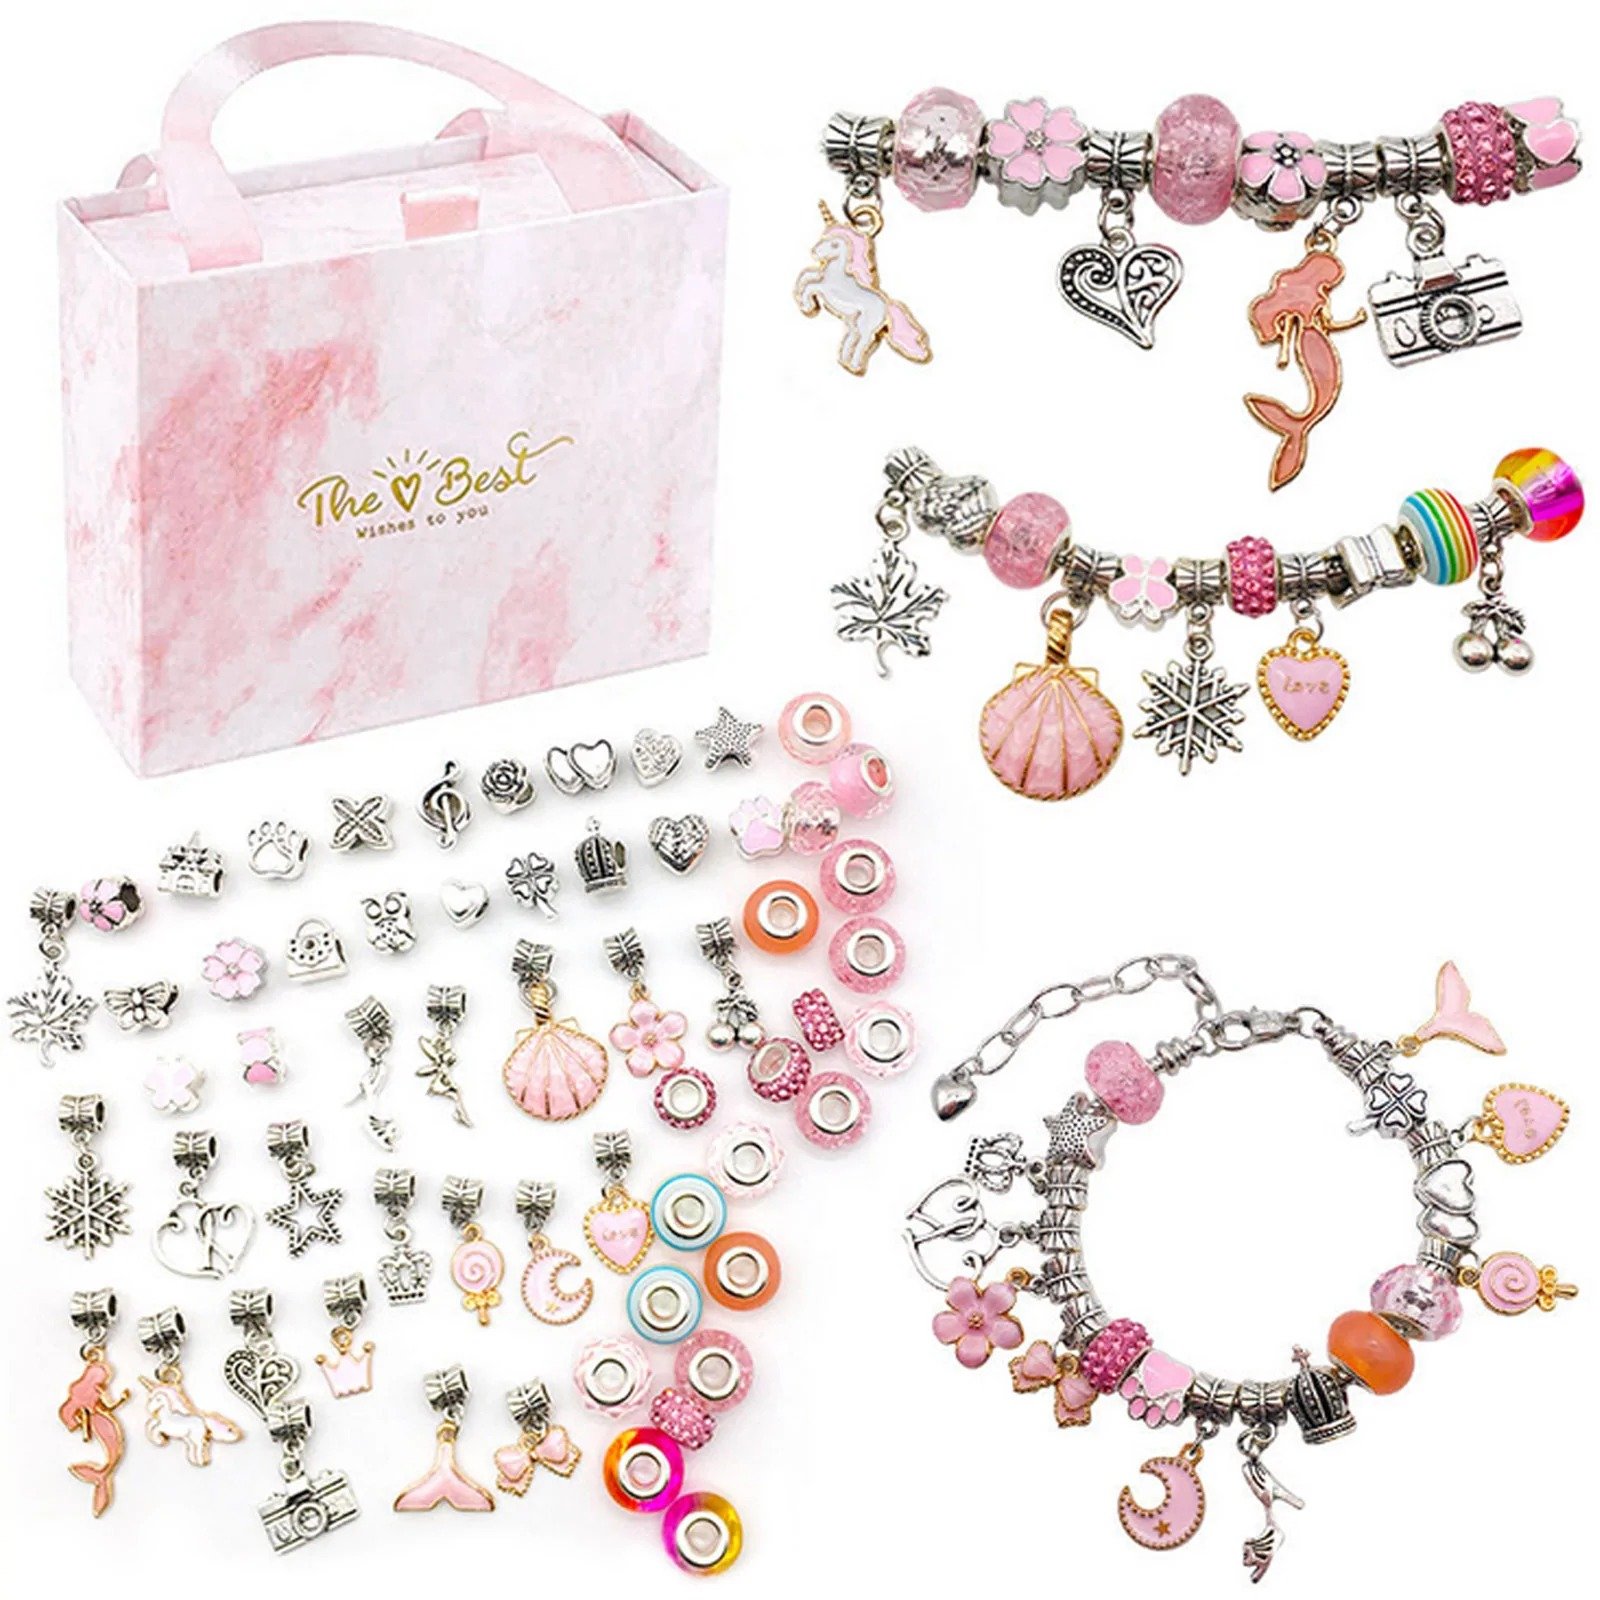 (🌲Early Christmas Sale- 50% OFF) Charm Bracelet Jewerly Making Kit